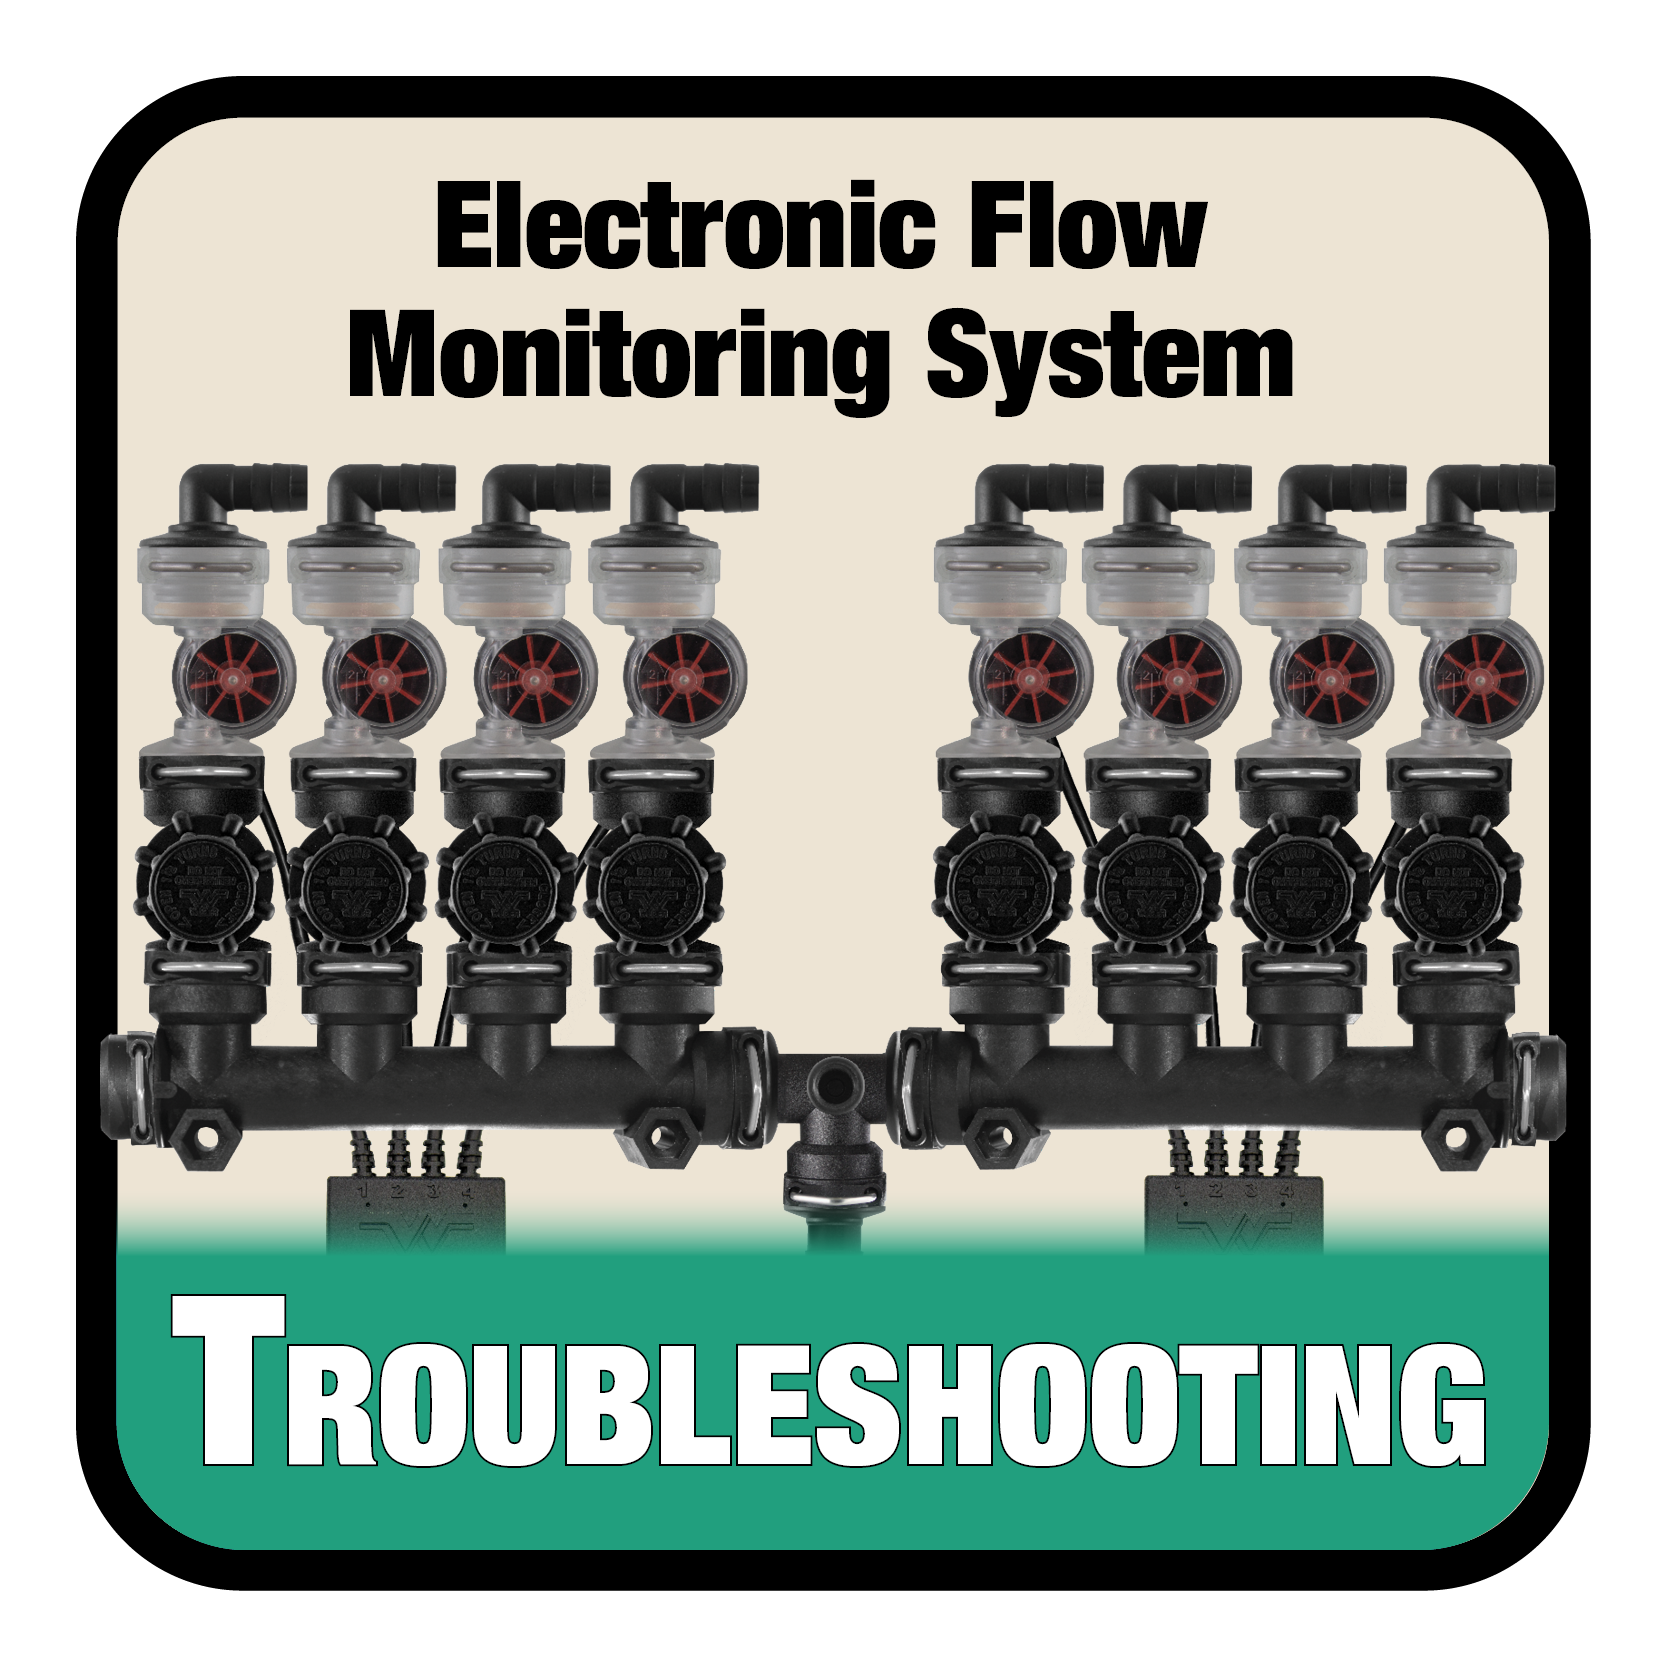 Troubleshooting Guide for Any issues or problems with setting up and using the Electronic Flow Monitoring System